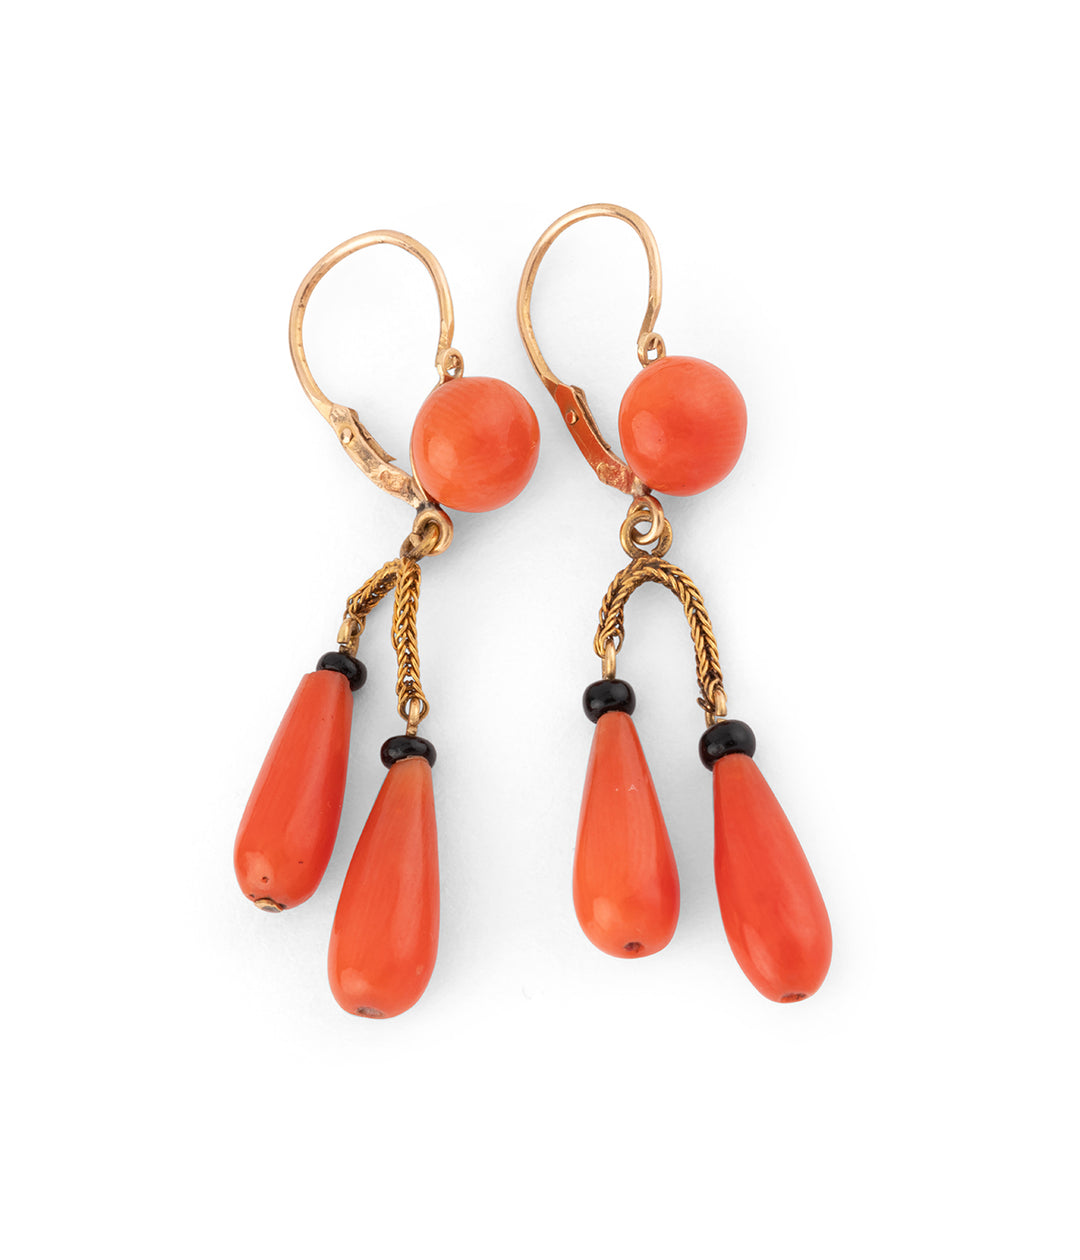 Antique french earrings coral "Edma" - Caillou Paris